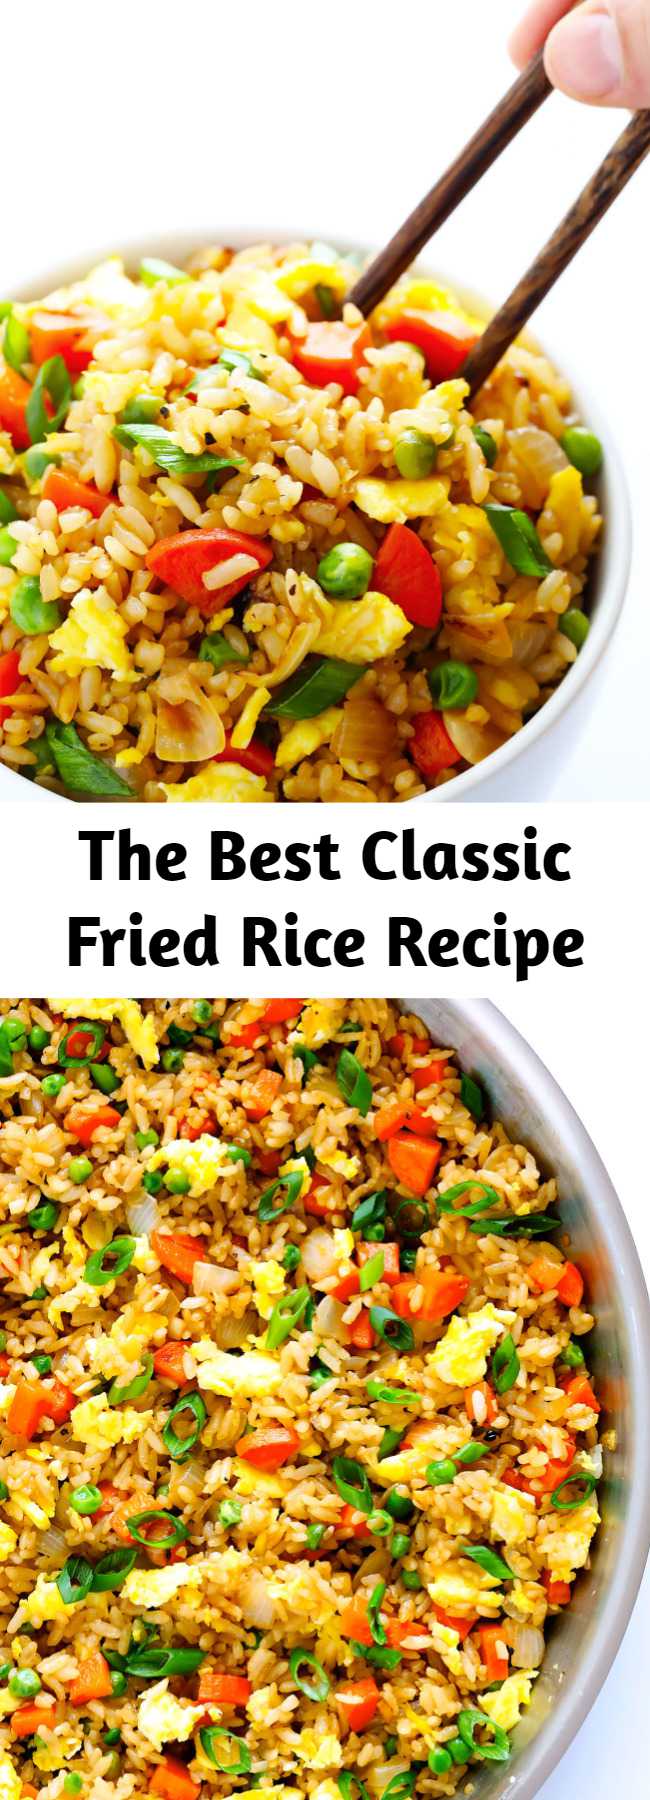 The Best Classic Fried Rice Recipe - Learn how to make fried rice with this classic recipe. It only takes 15 minutes to make, it’s easy to customize with your favorite add-ins, and it’s SO flavorful and delicious!